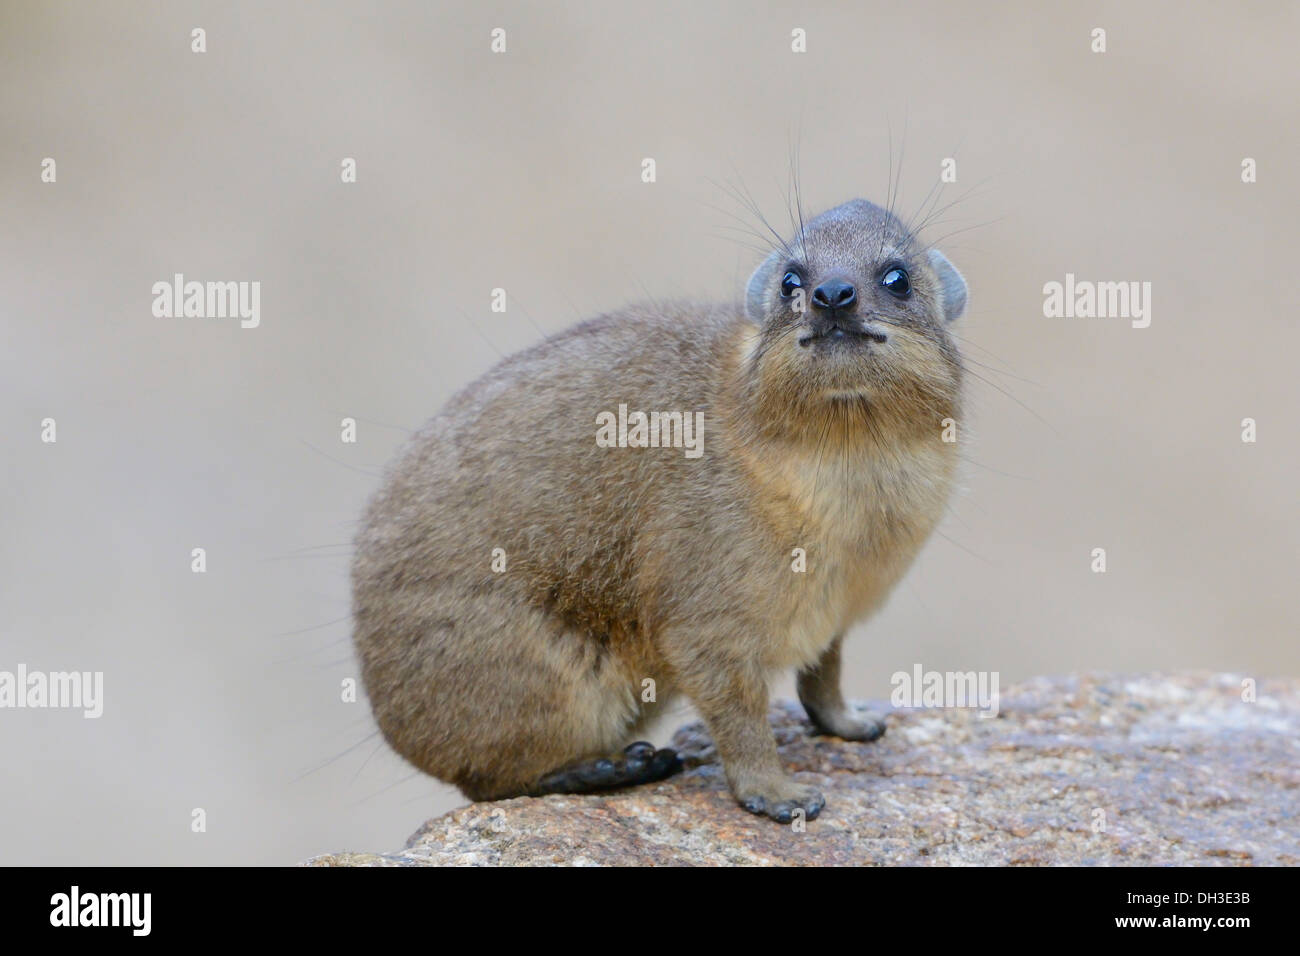 Rock Hyrax or Cape Hyrax (Procavia capensis), Baden-Württemberg, Germany Stock Photo